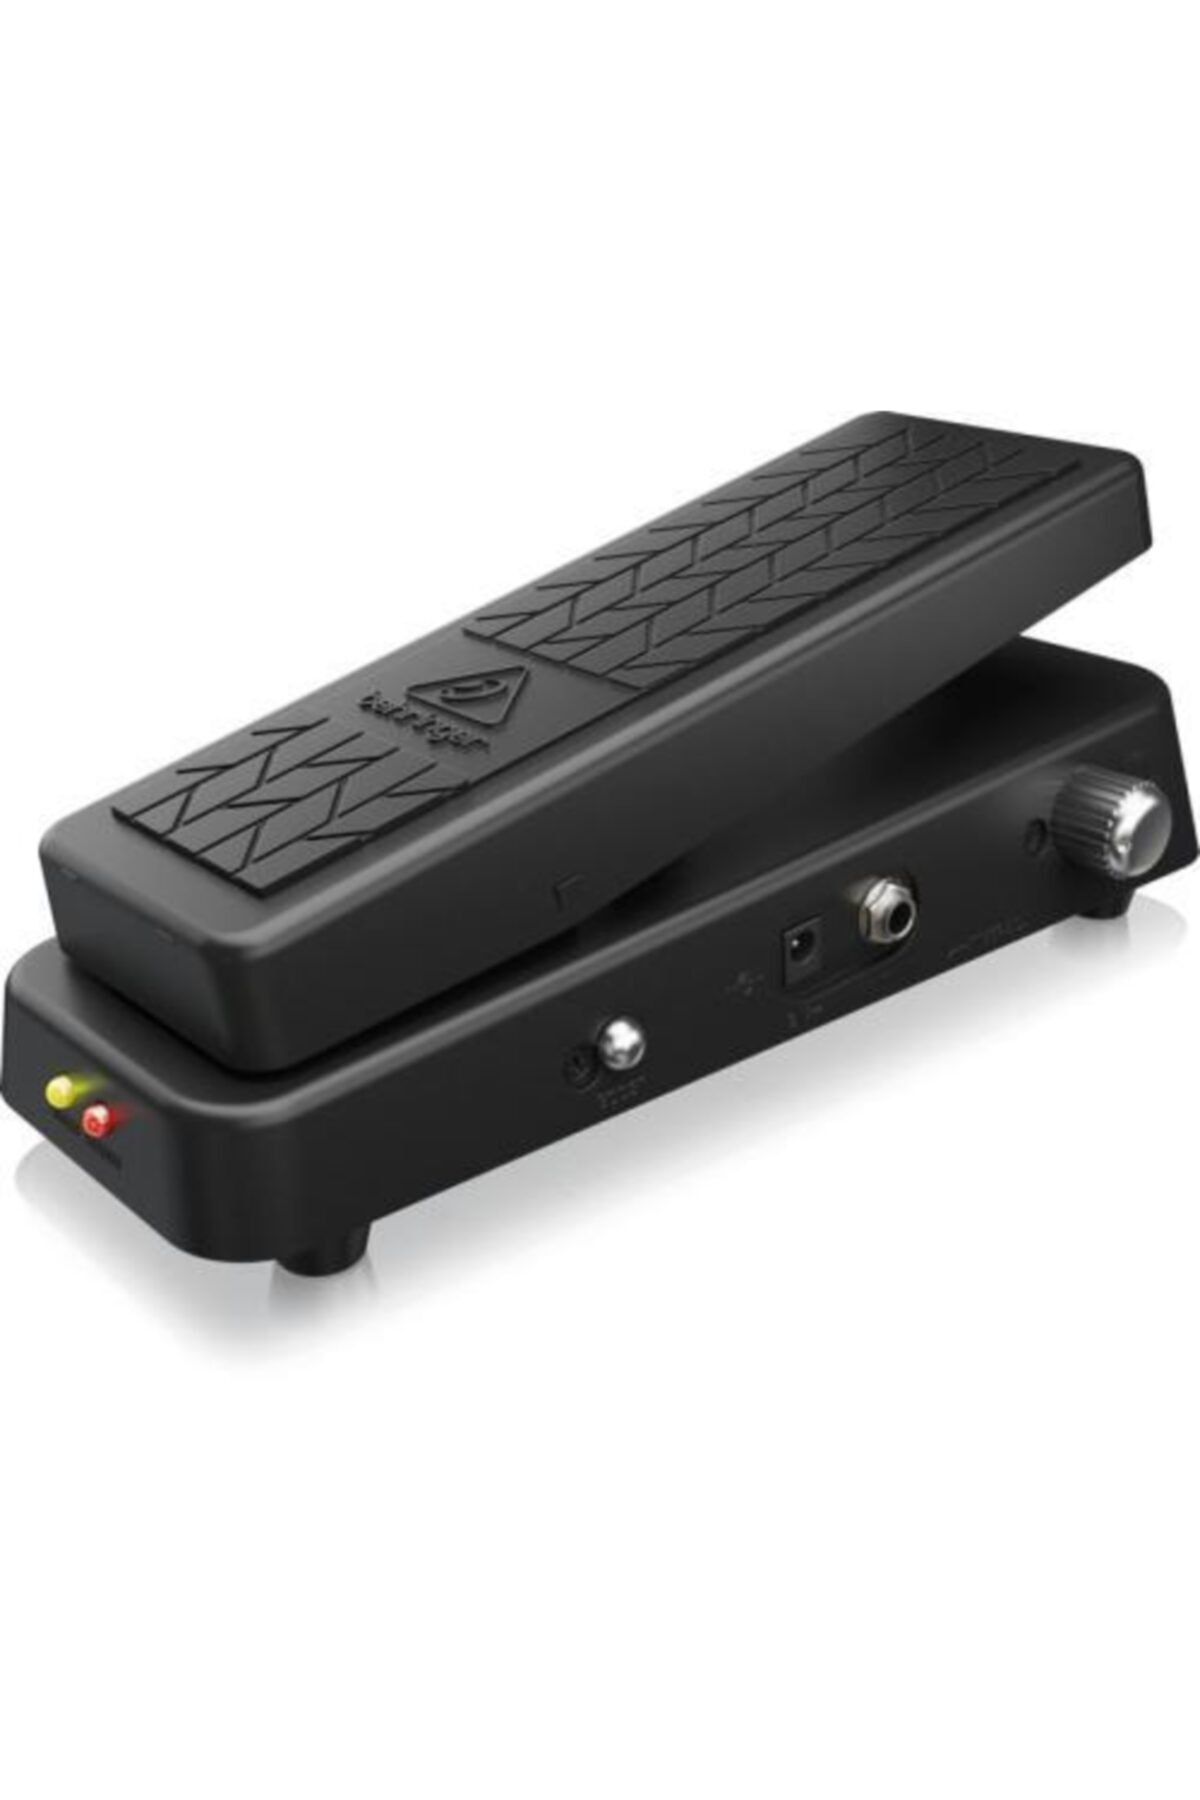 Behringer Hb01 Hellbabe Hb01 Ultimate Wah-wah Pedal With Optical Control